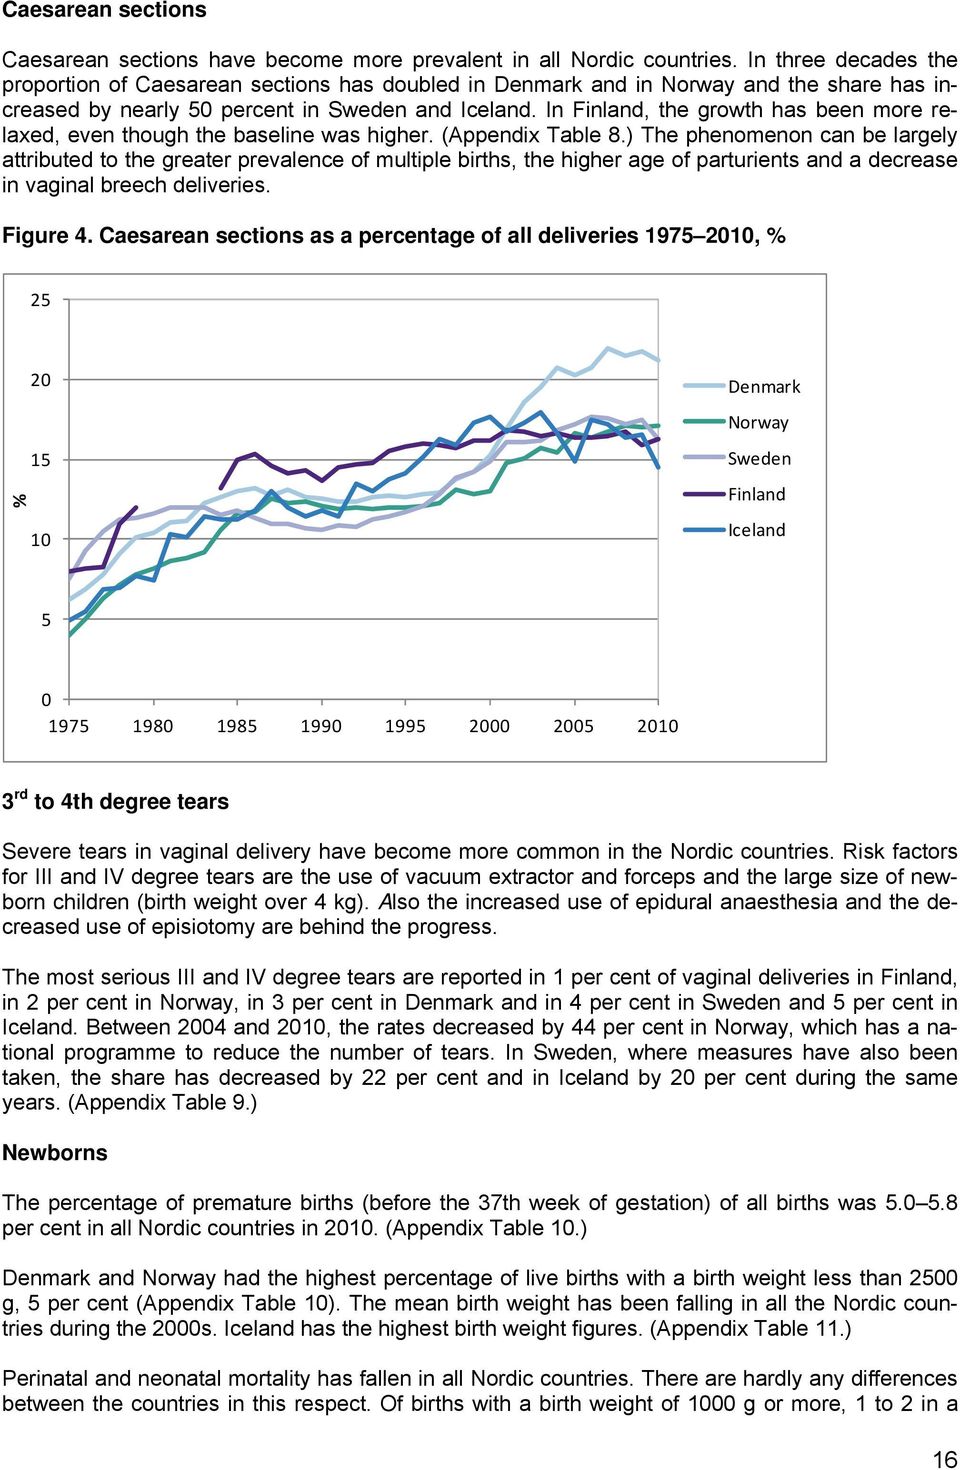 In Finland, the growth has been more relaxed, even though the baseline was higher. (Appendix Table 8.